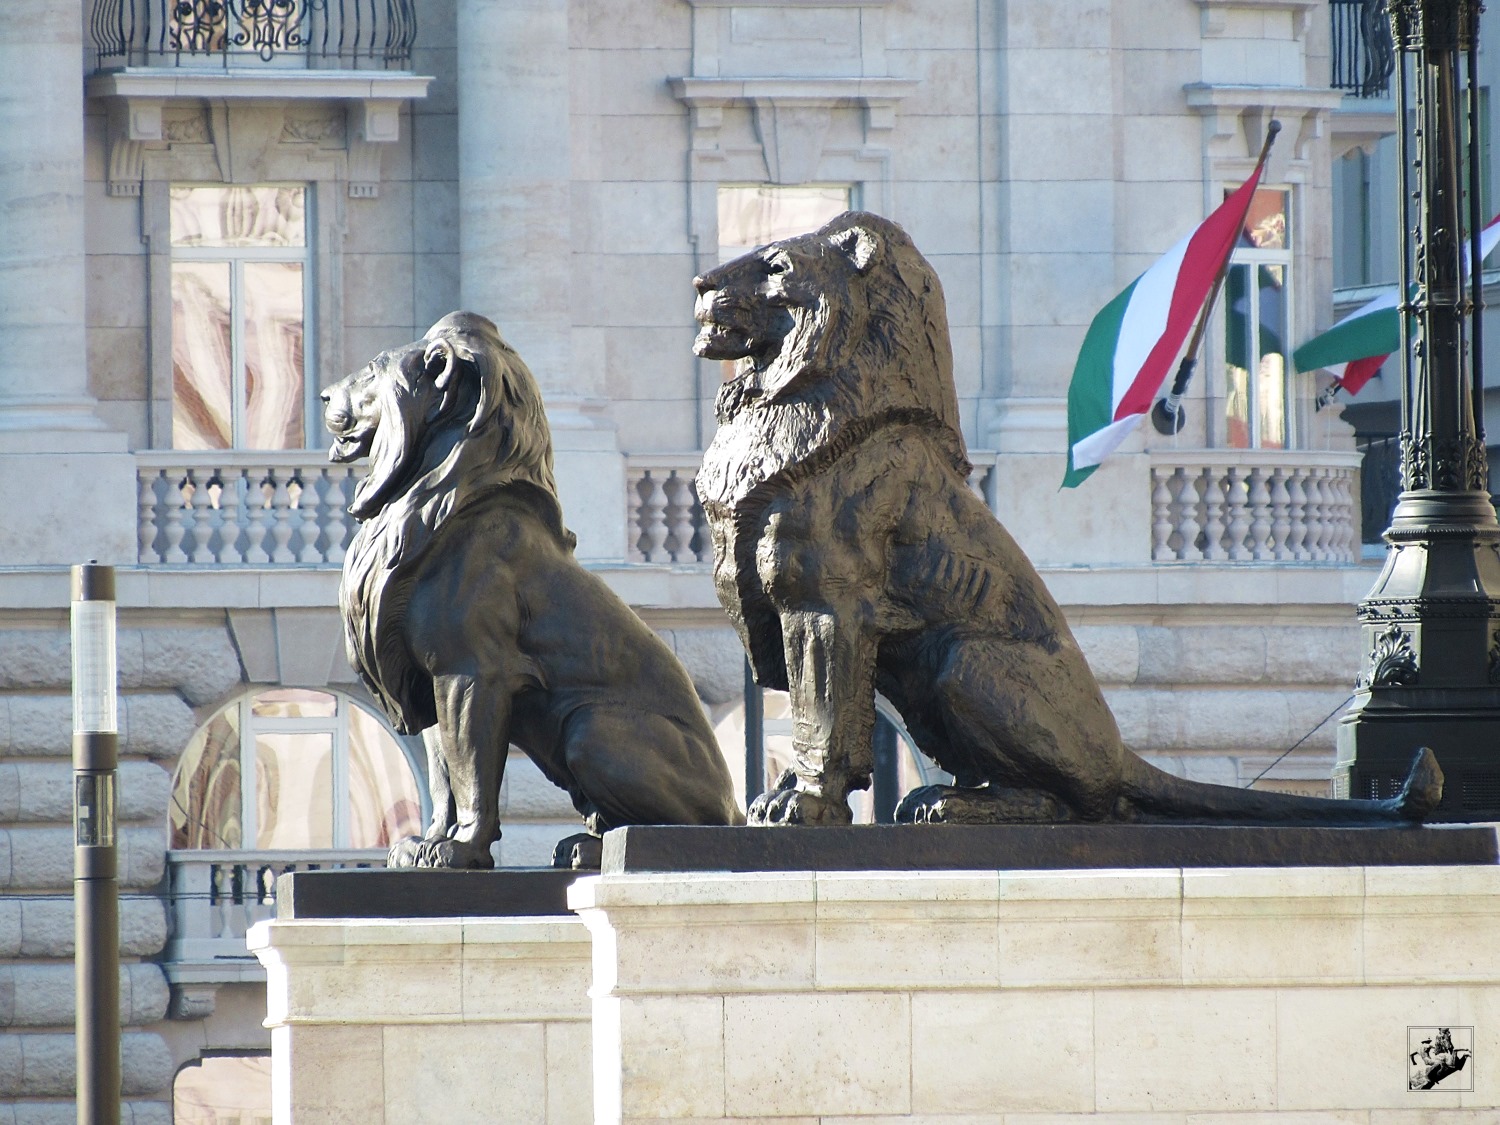 Shot of the lion statues guarding the Parliament